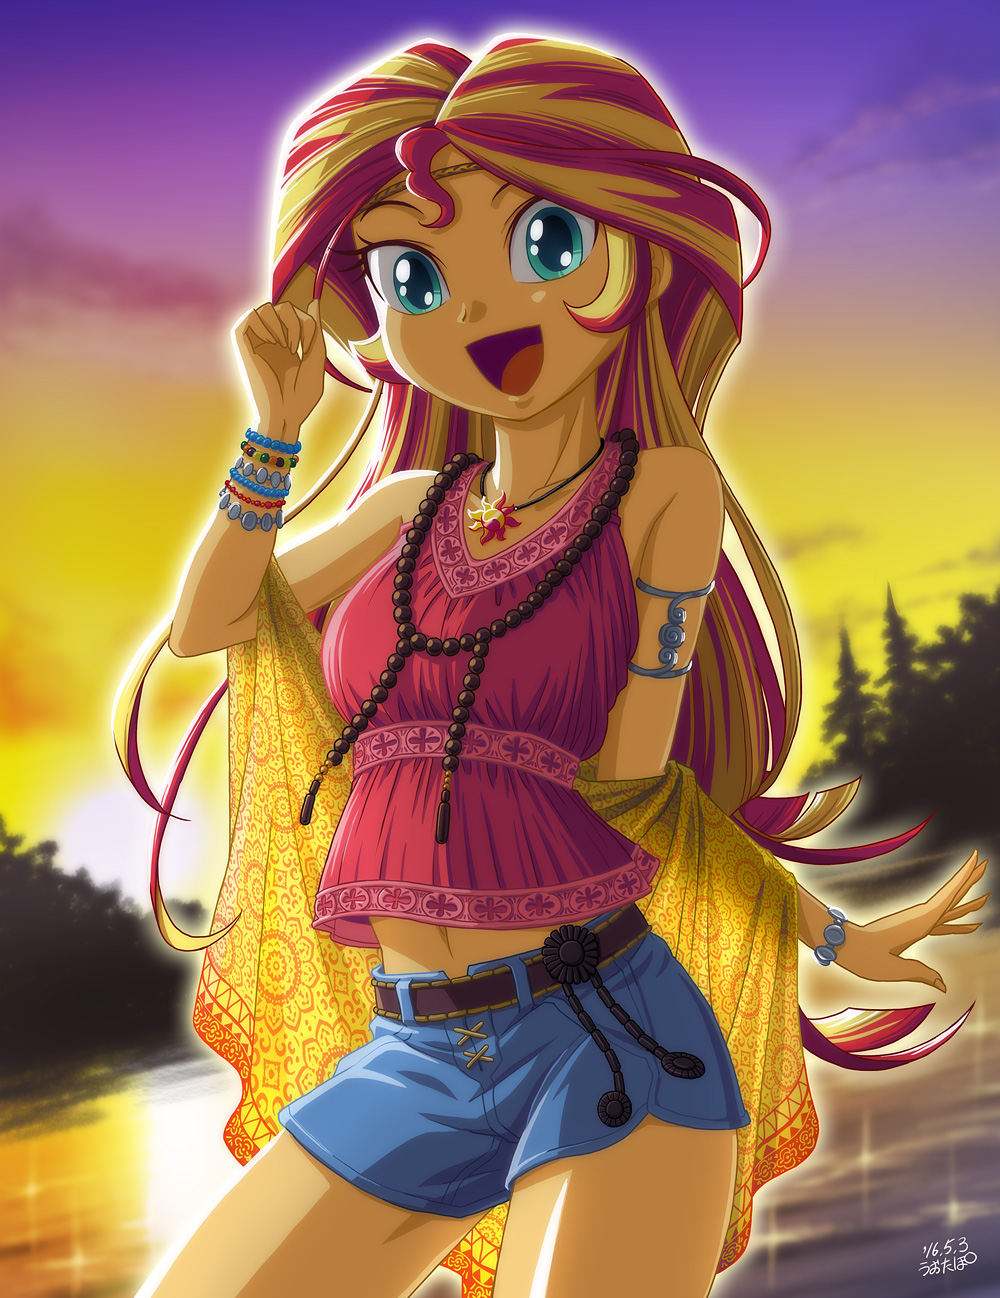 My Little Pony: Equestria Girls - Legend of Everfree Art by uotapo